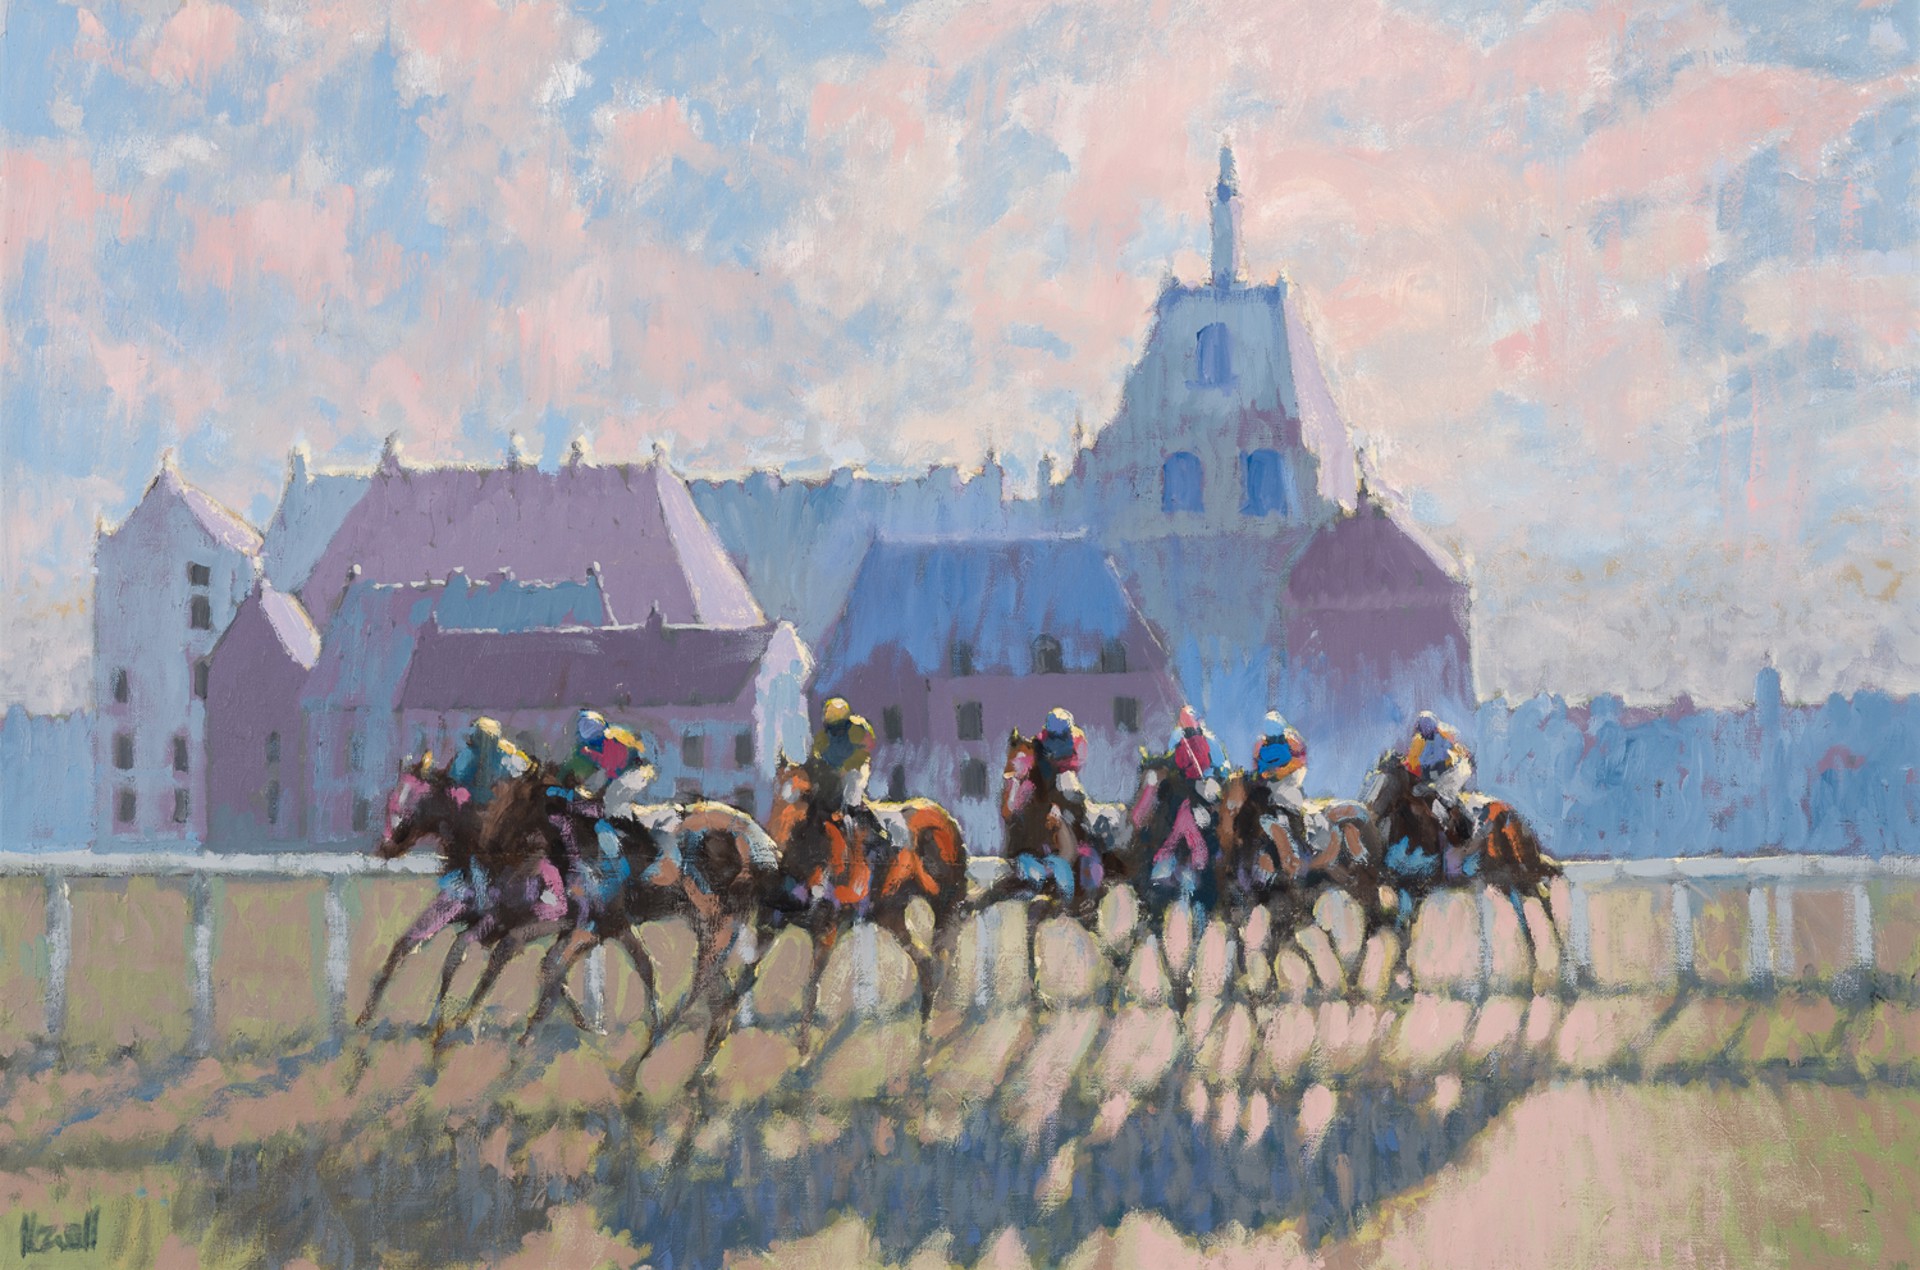 INTO THE STRAIGHT, CHANTILLY by Peter Howell